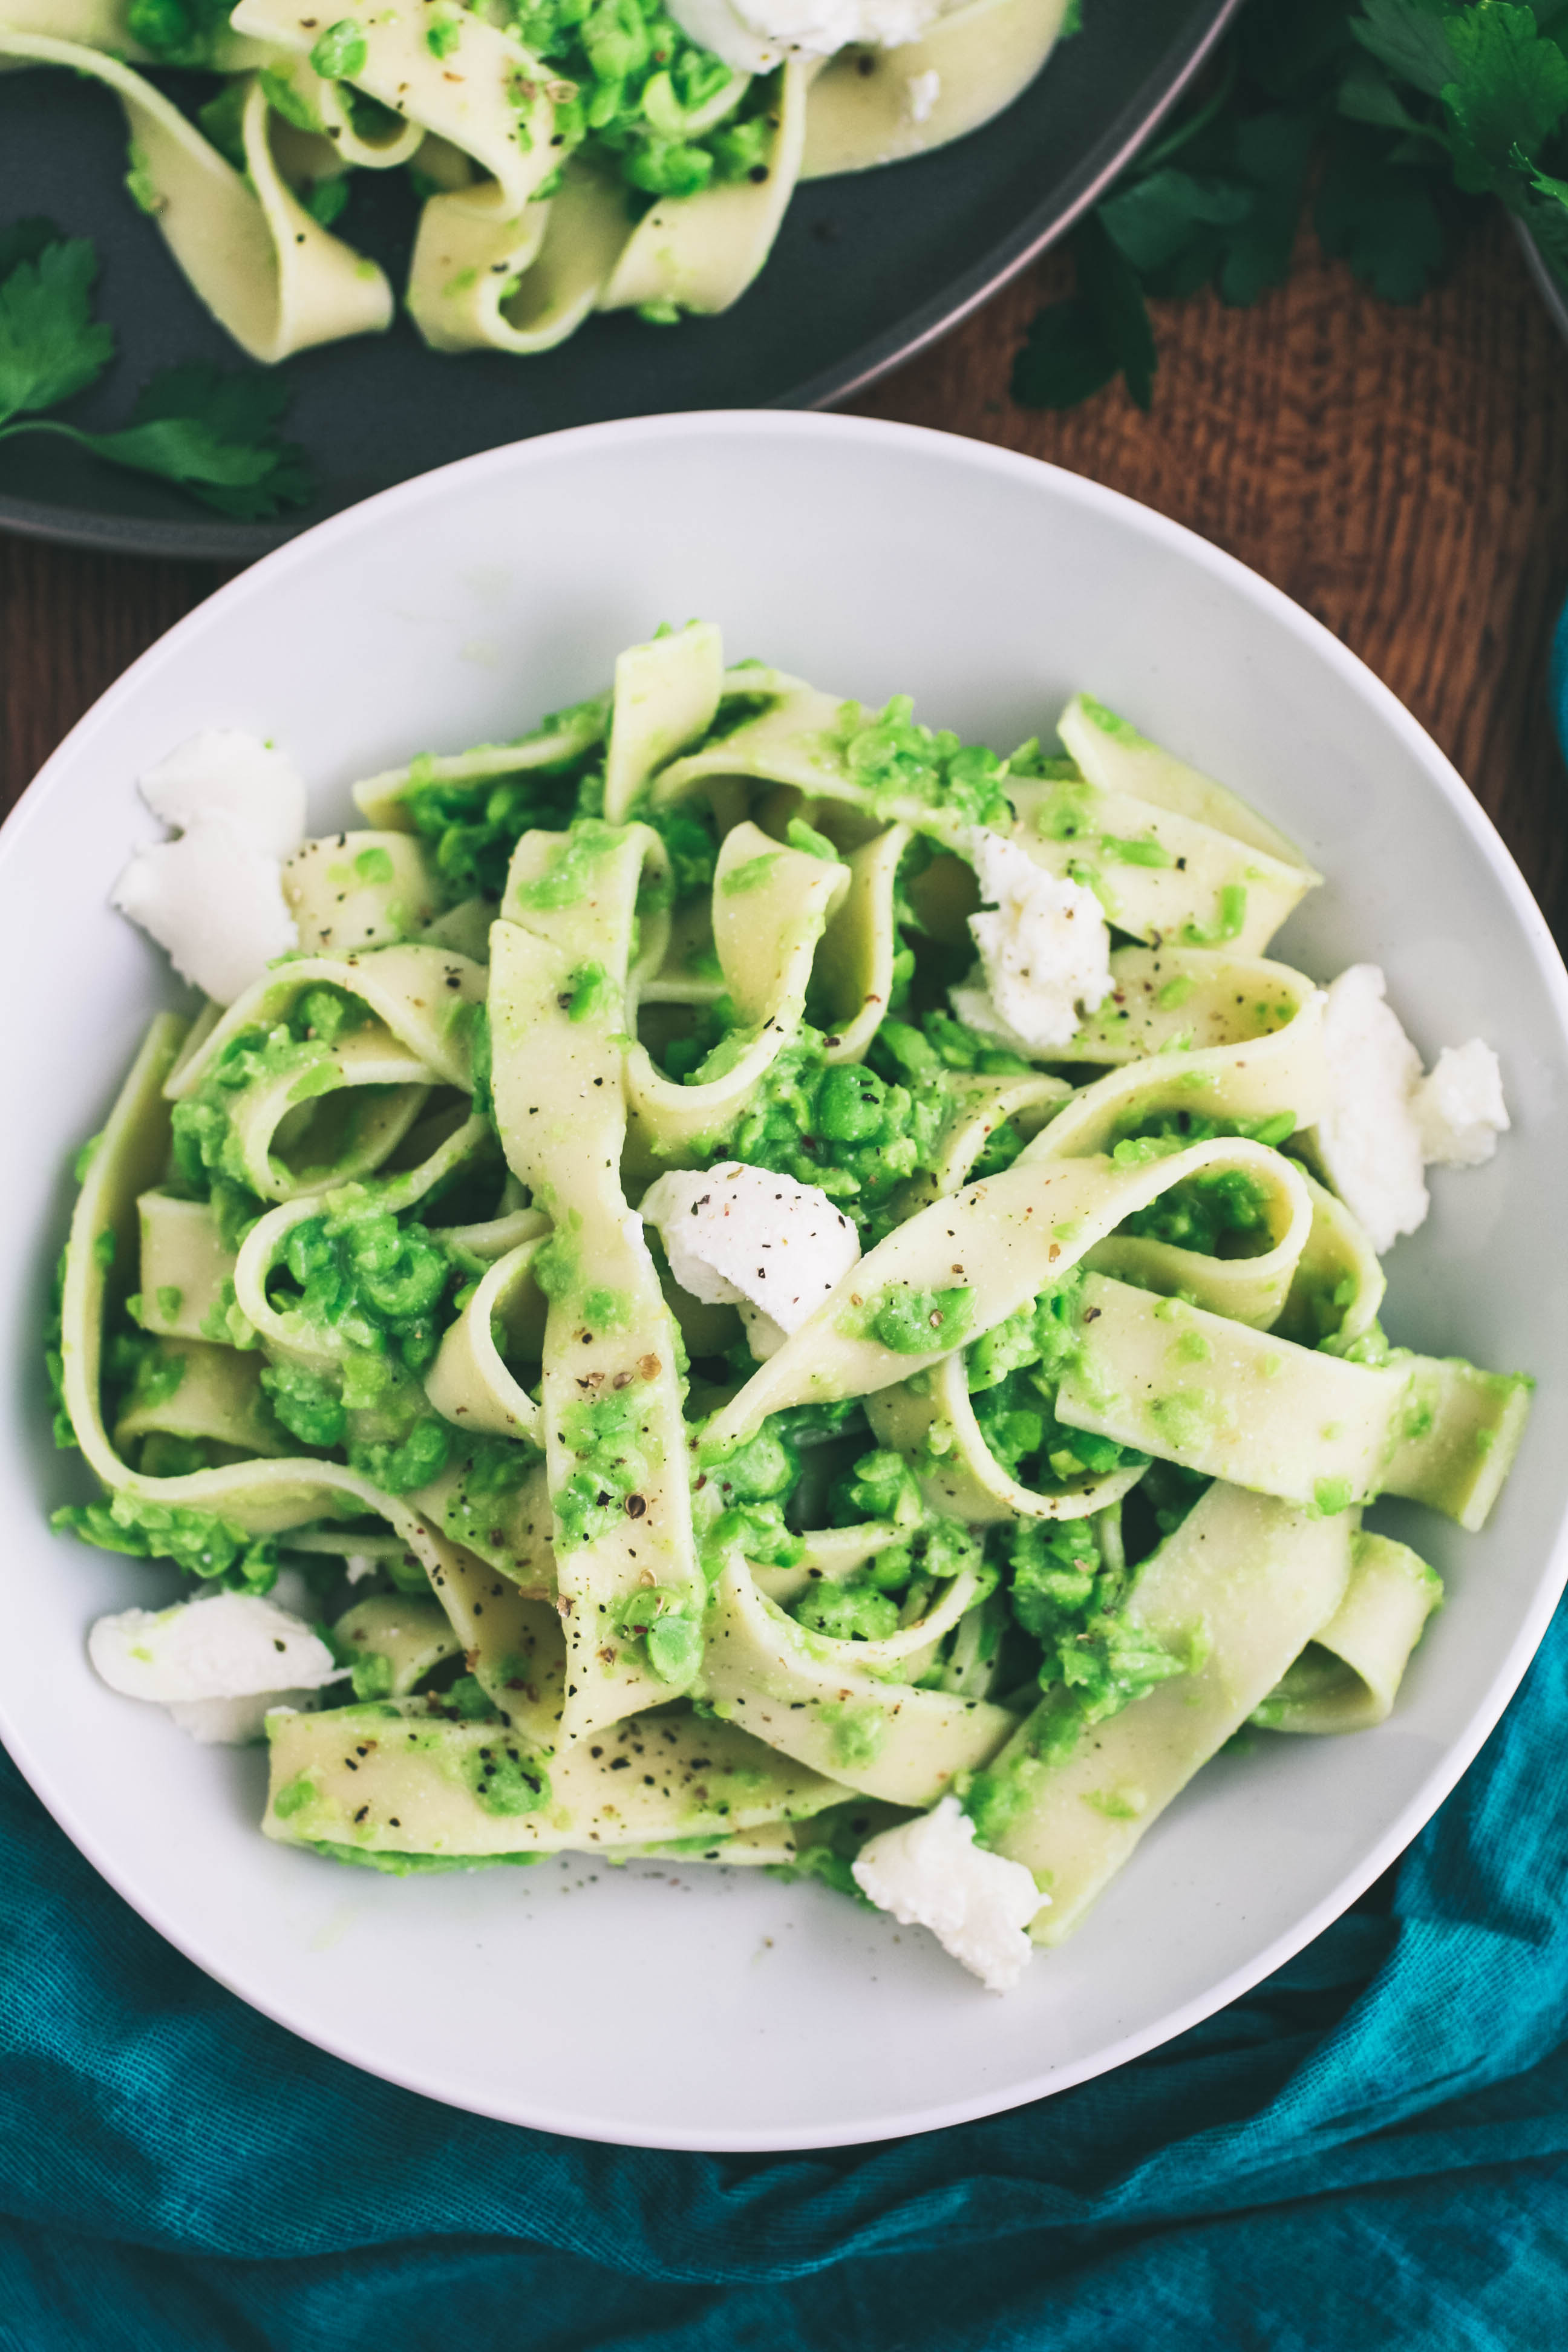 Pasta with Smashed Peas and Ricotta is a flavorful and fabulous pasta dish that's easy to make! You'll love Pasta with Smashed Peas and Ricotta for a flavorful meal.